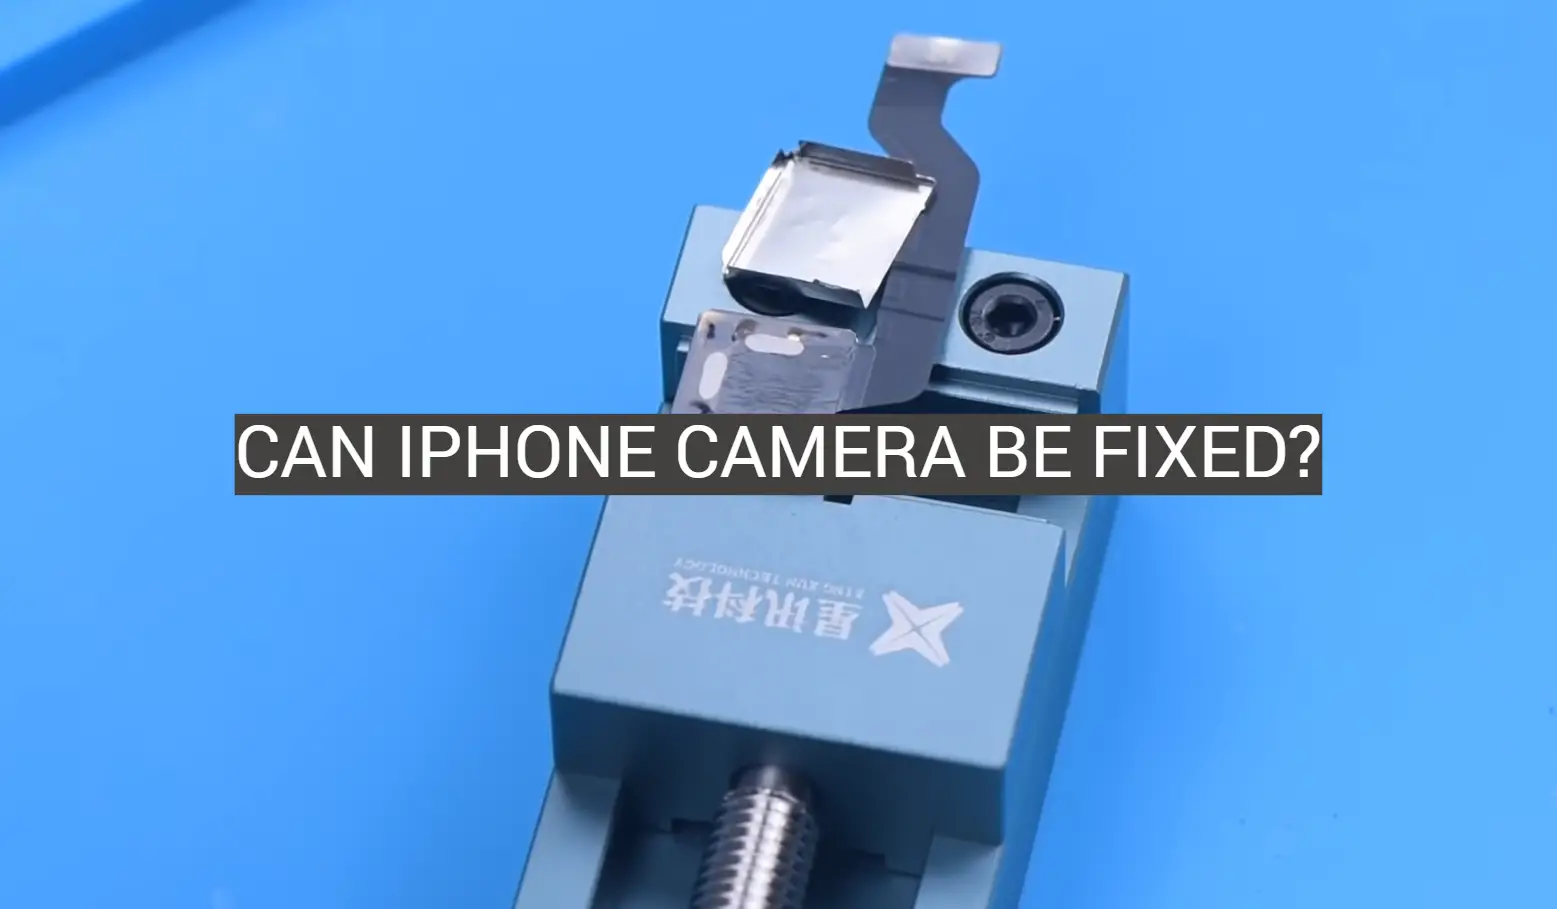 Can iPhone Camera Be Fixed?